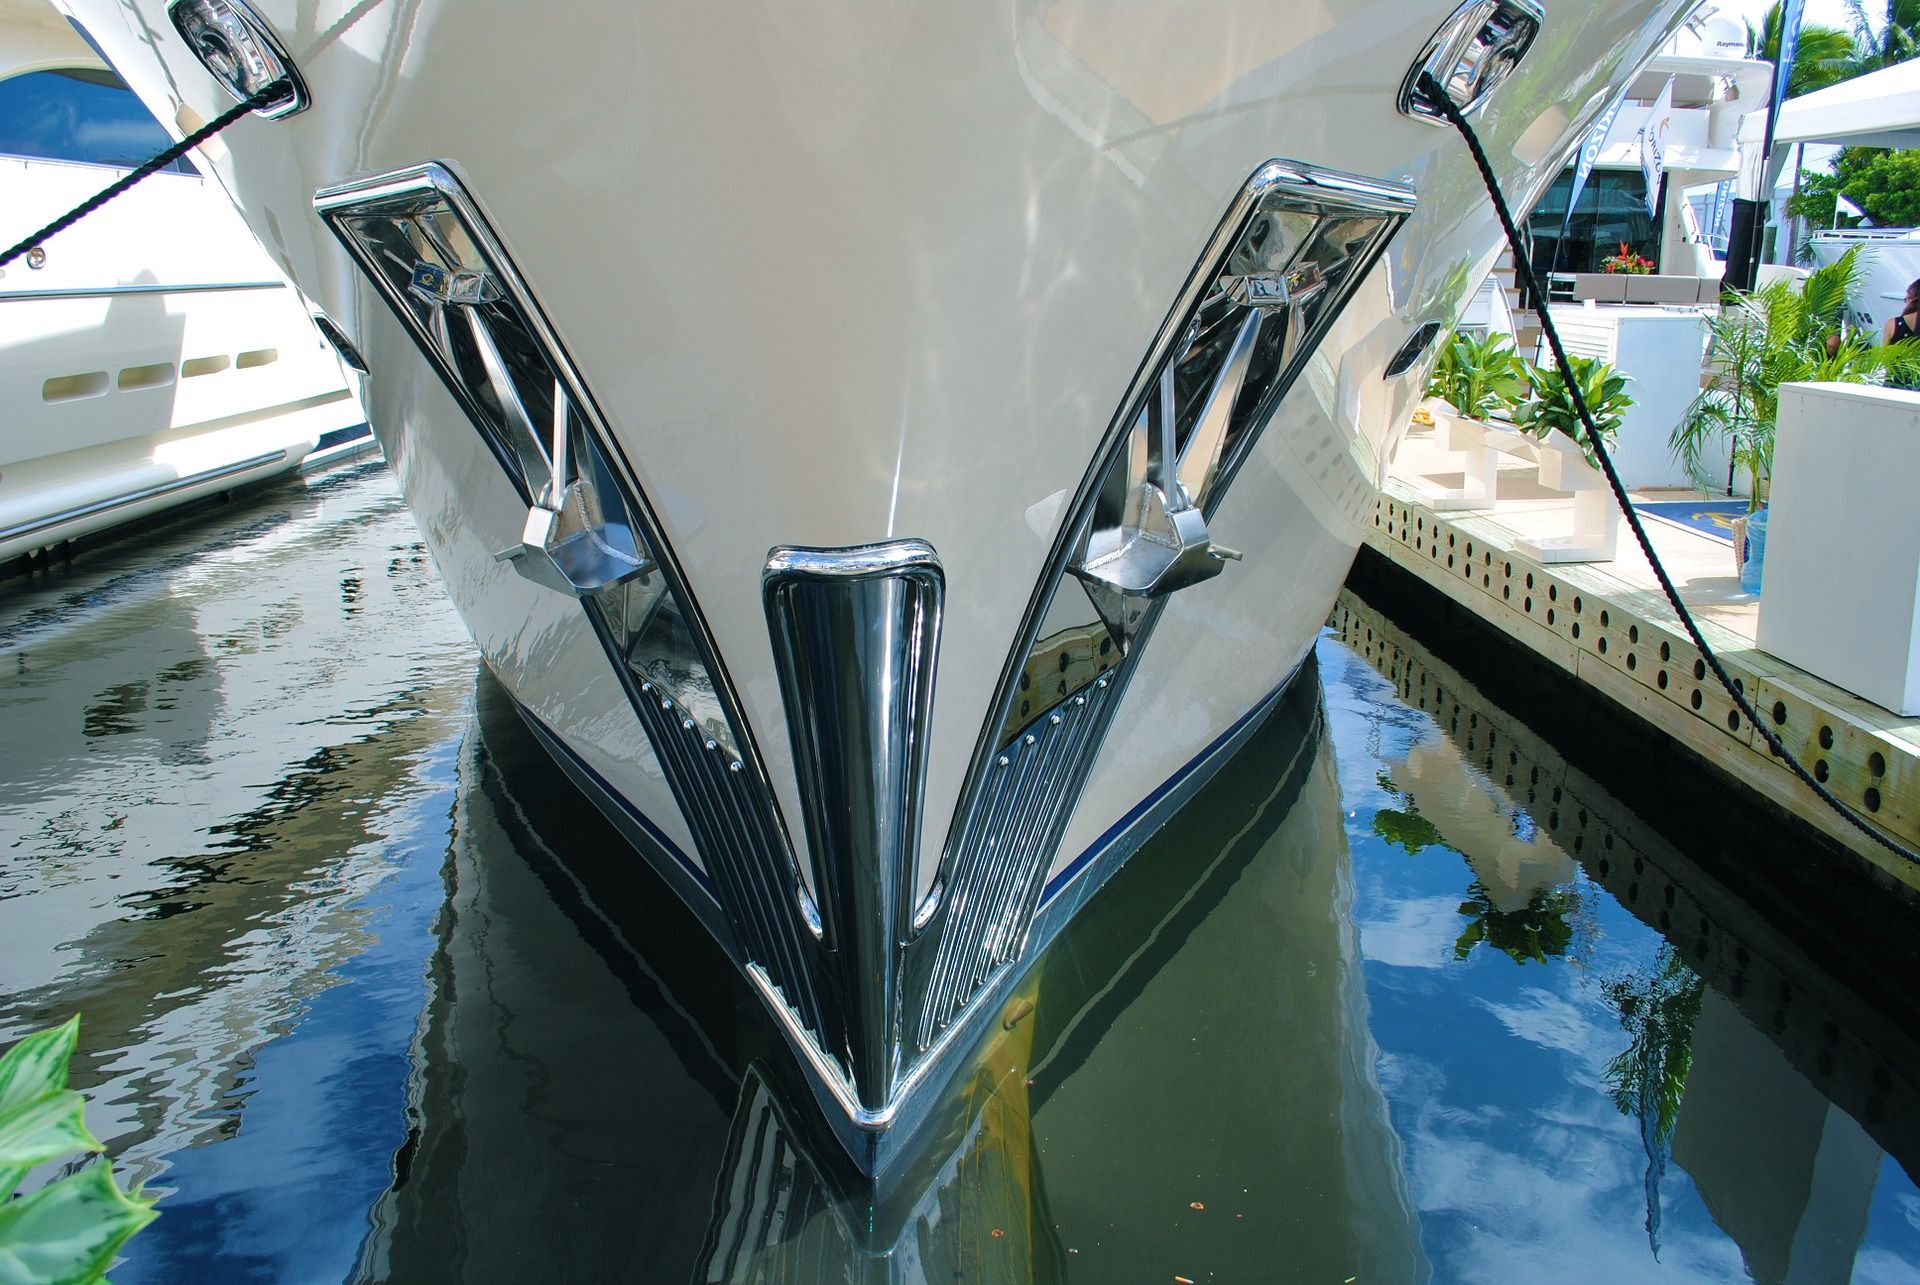 The bow of a superyacht moored in a harbor